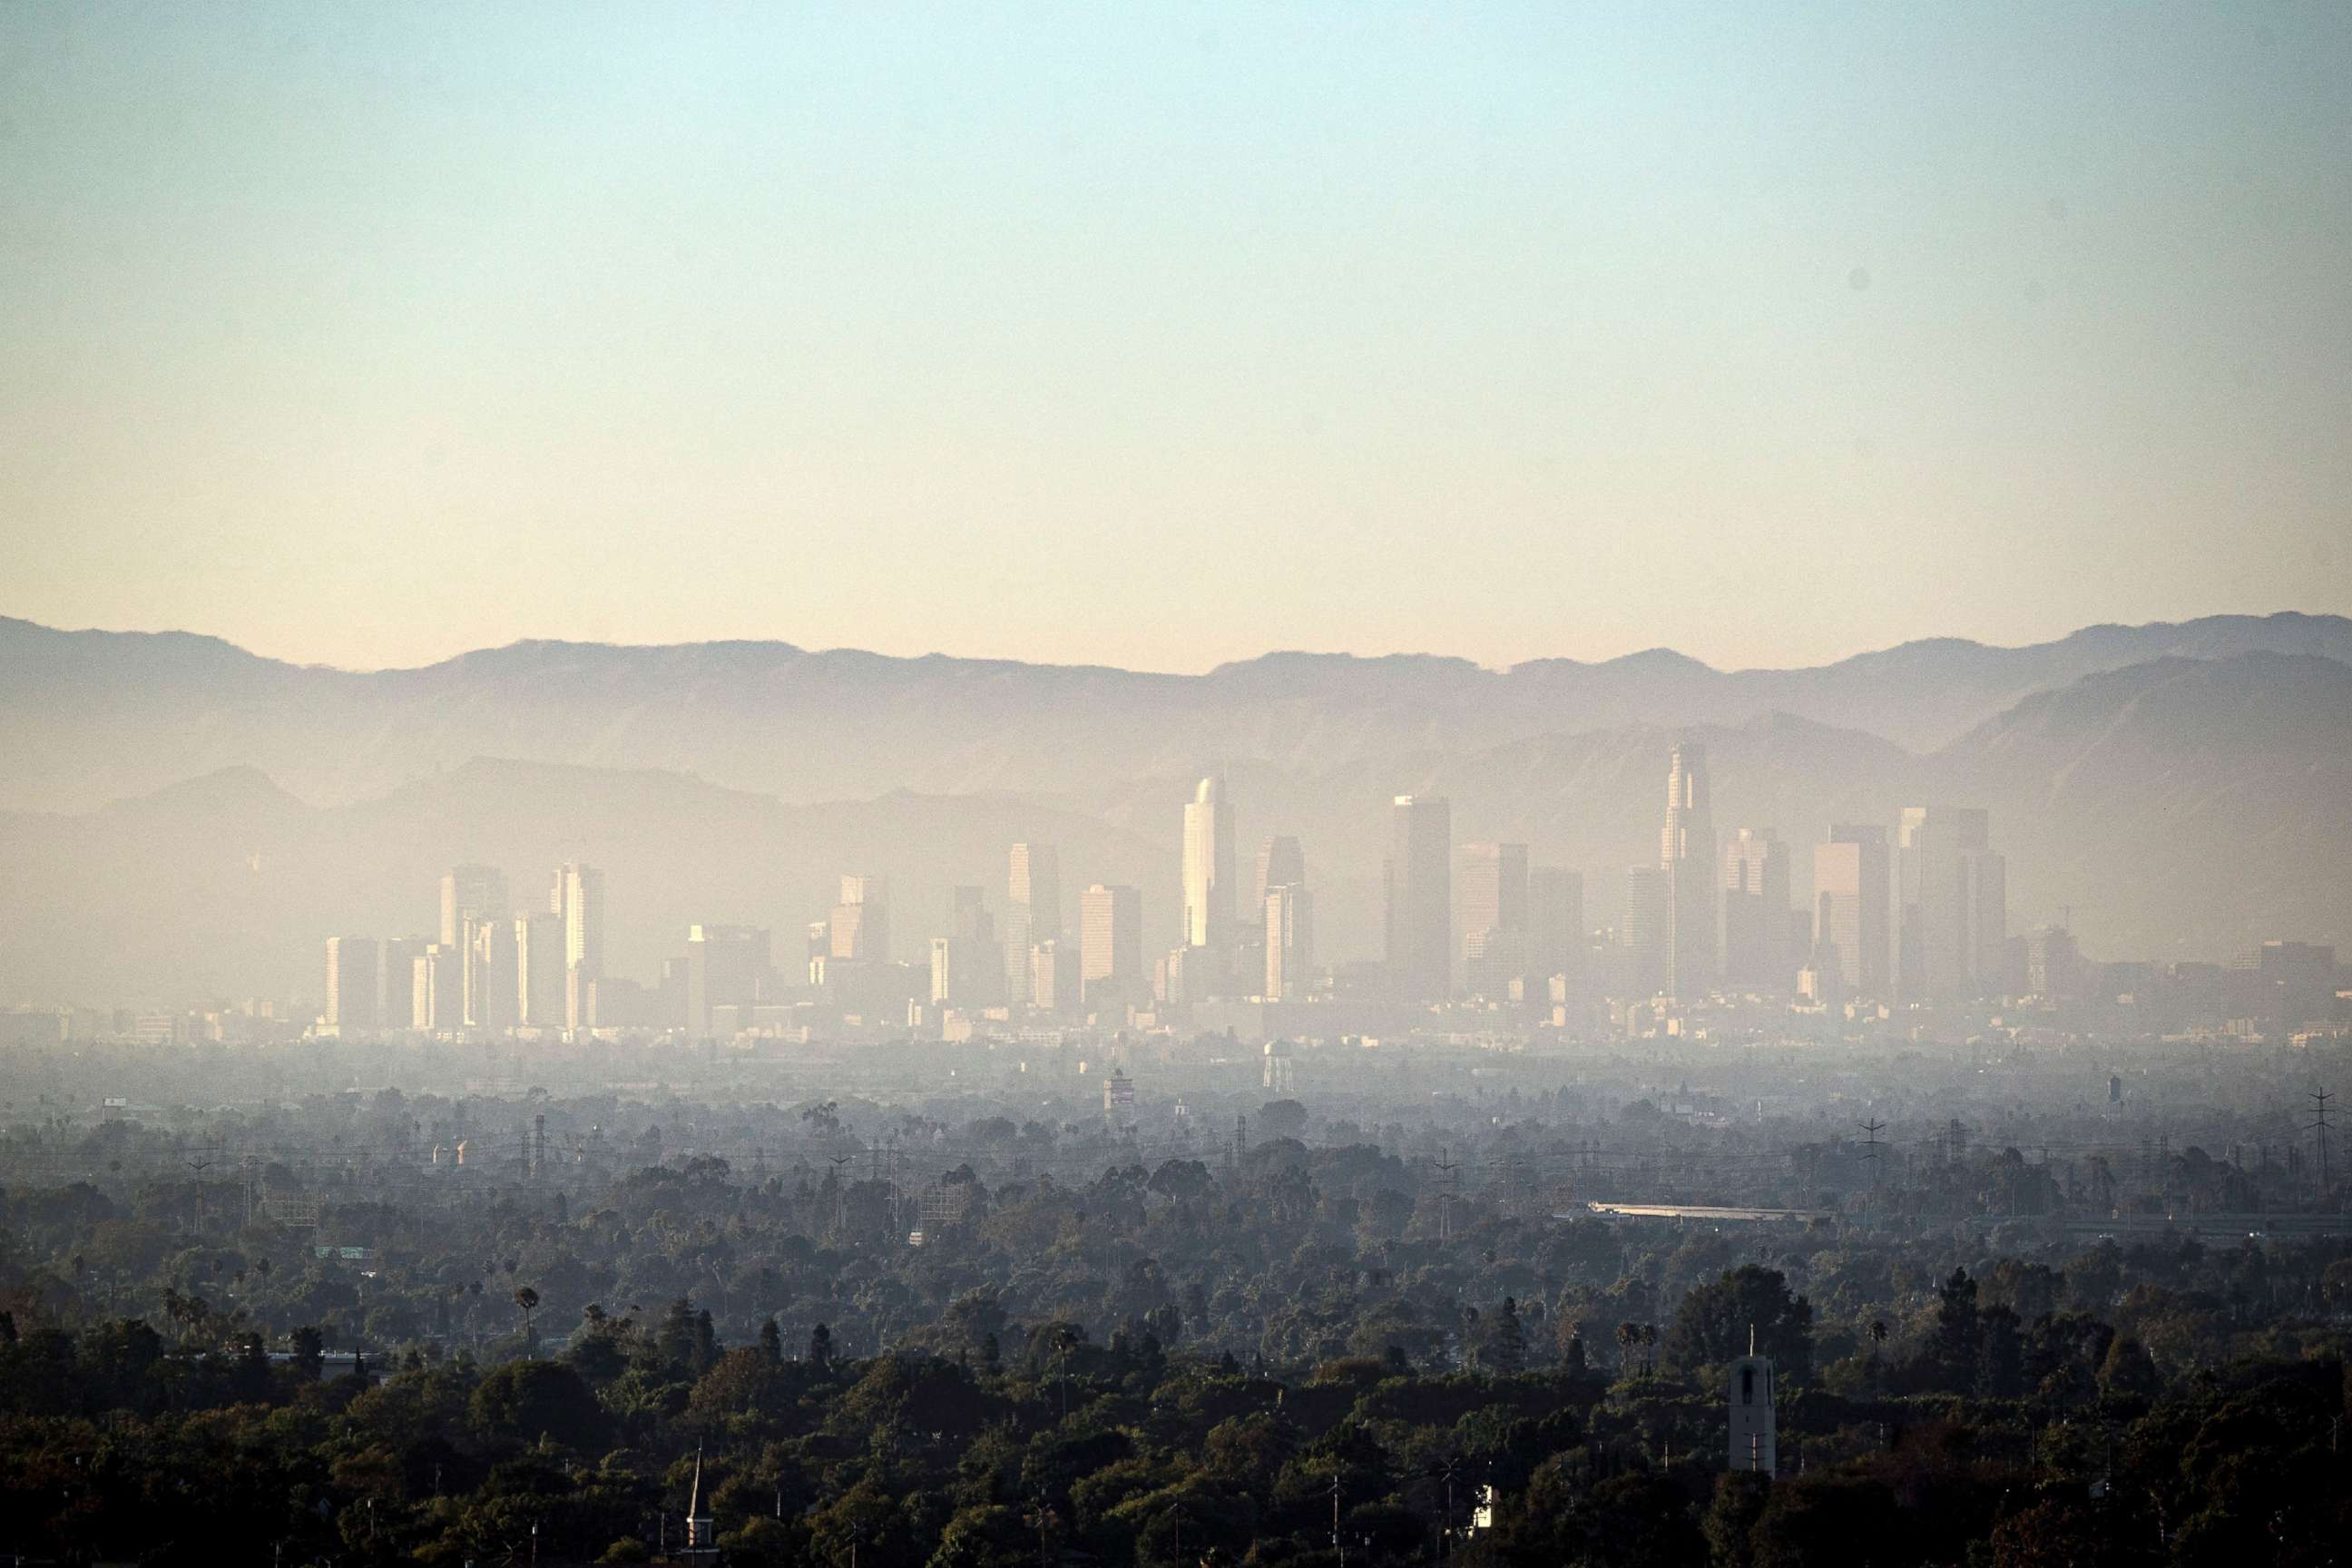 PHOTO: A layer of smog covers Downtown and the nearby areas in Los Angeles, Calif, on August 14, 2019. 